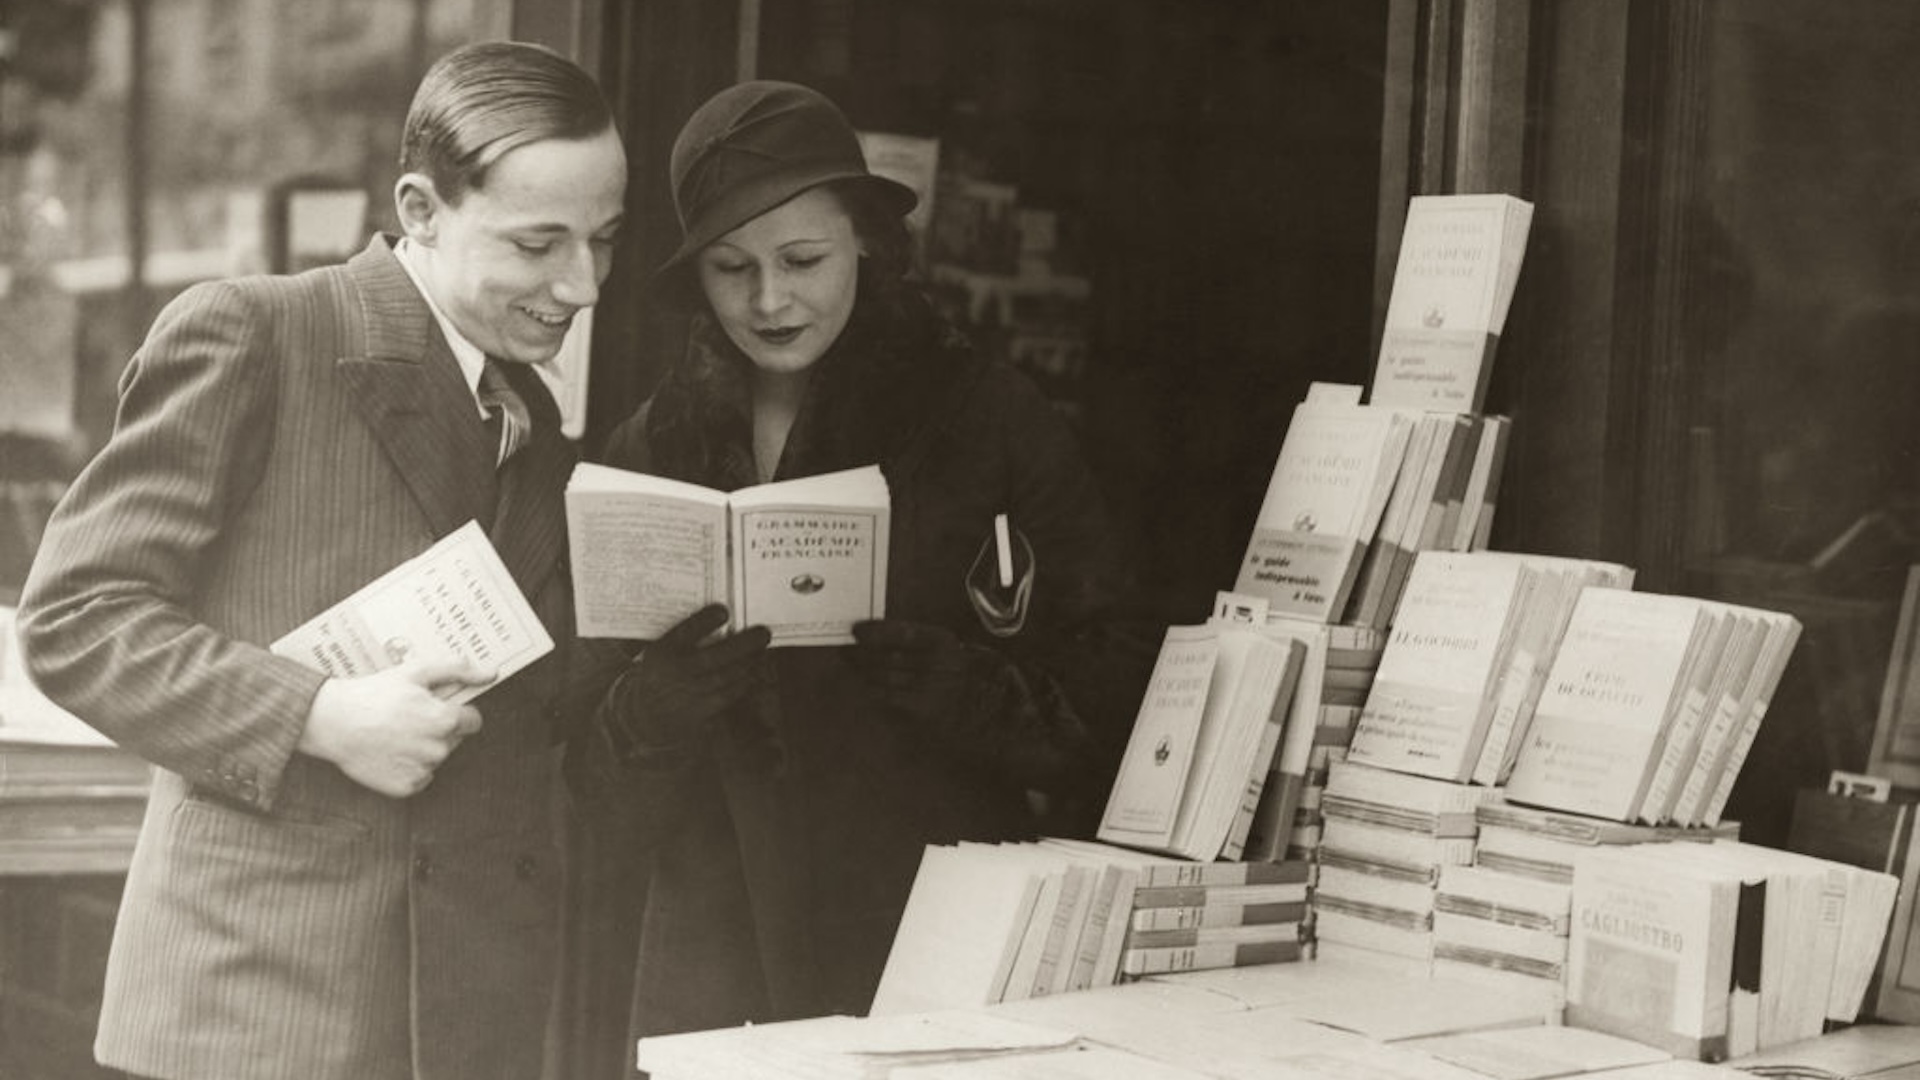 Shoppers in Paris flock to buy the new edition of the grammar book 'Grammaire de l'Academie Francaise', 1932.